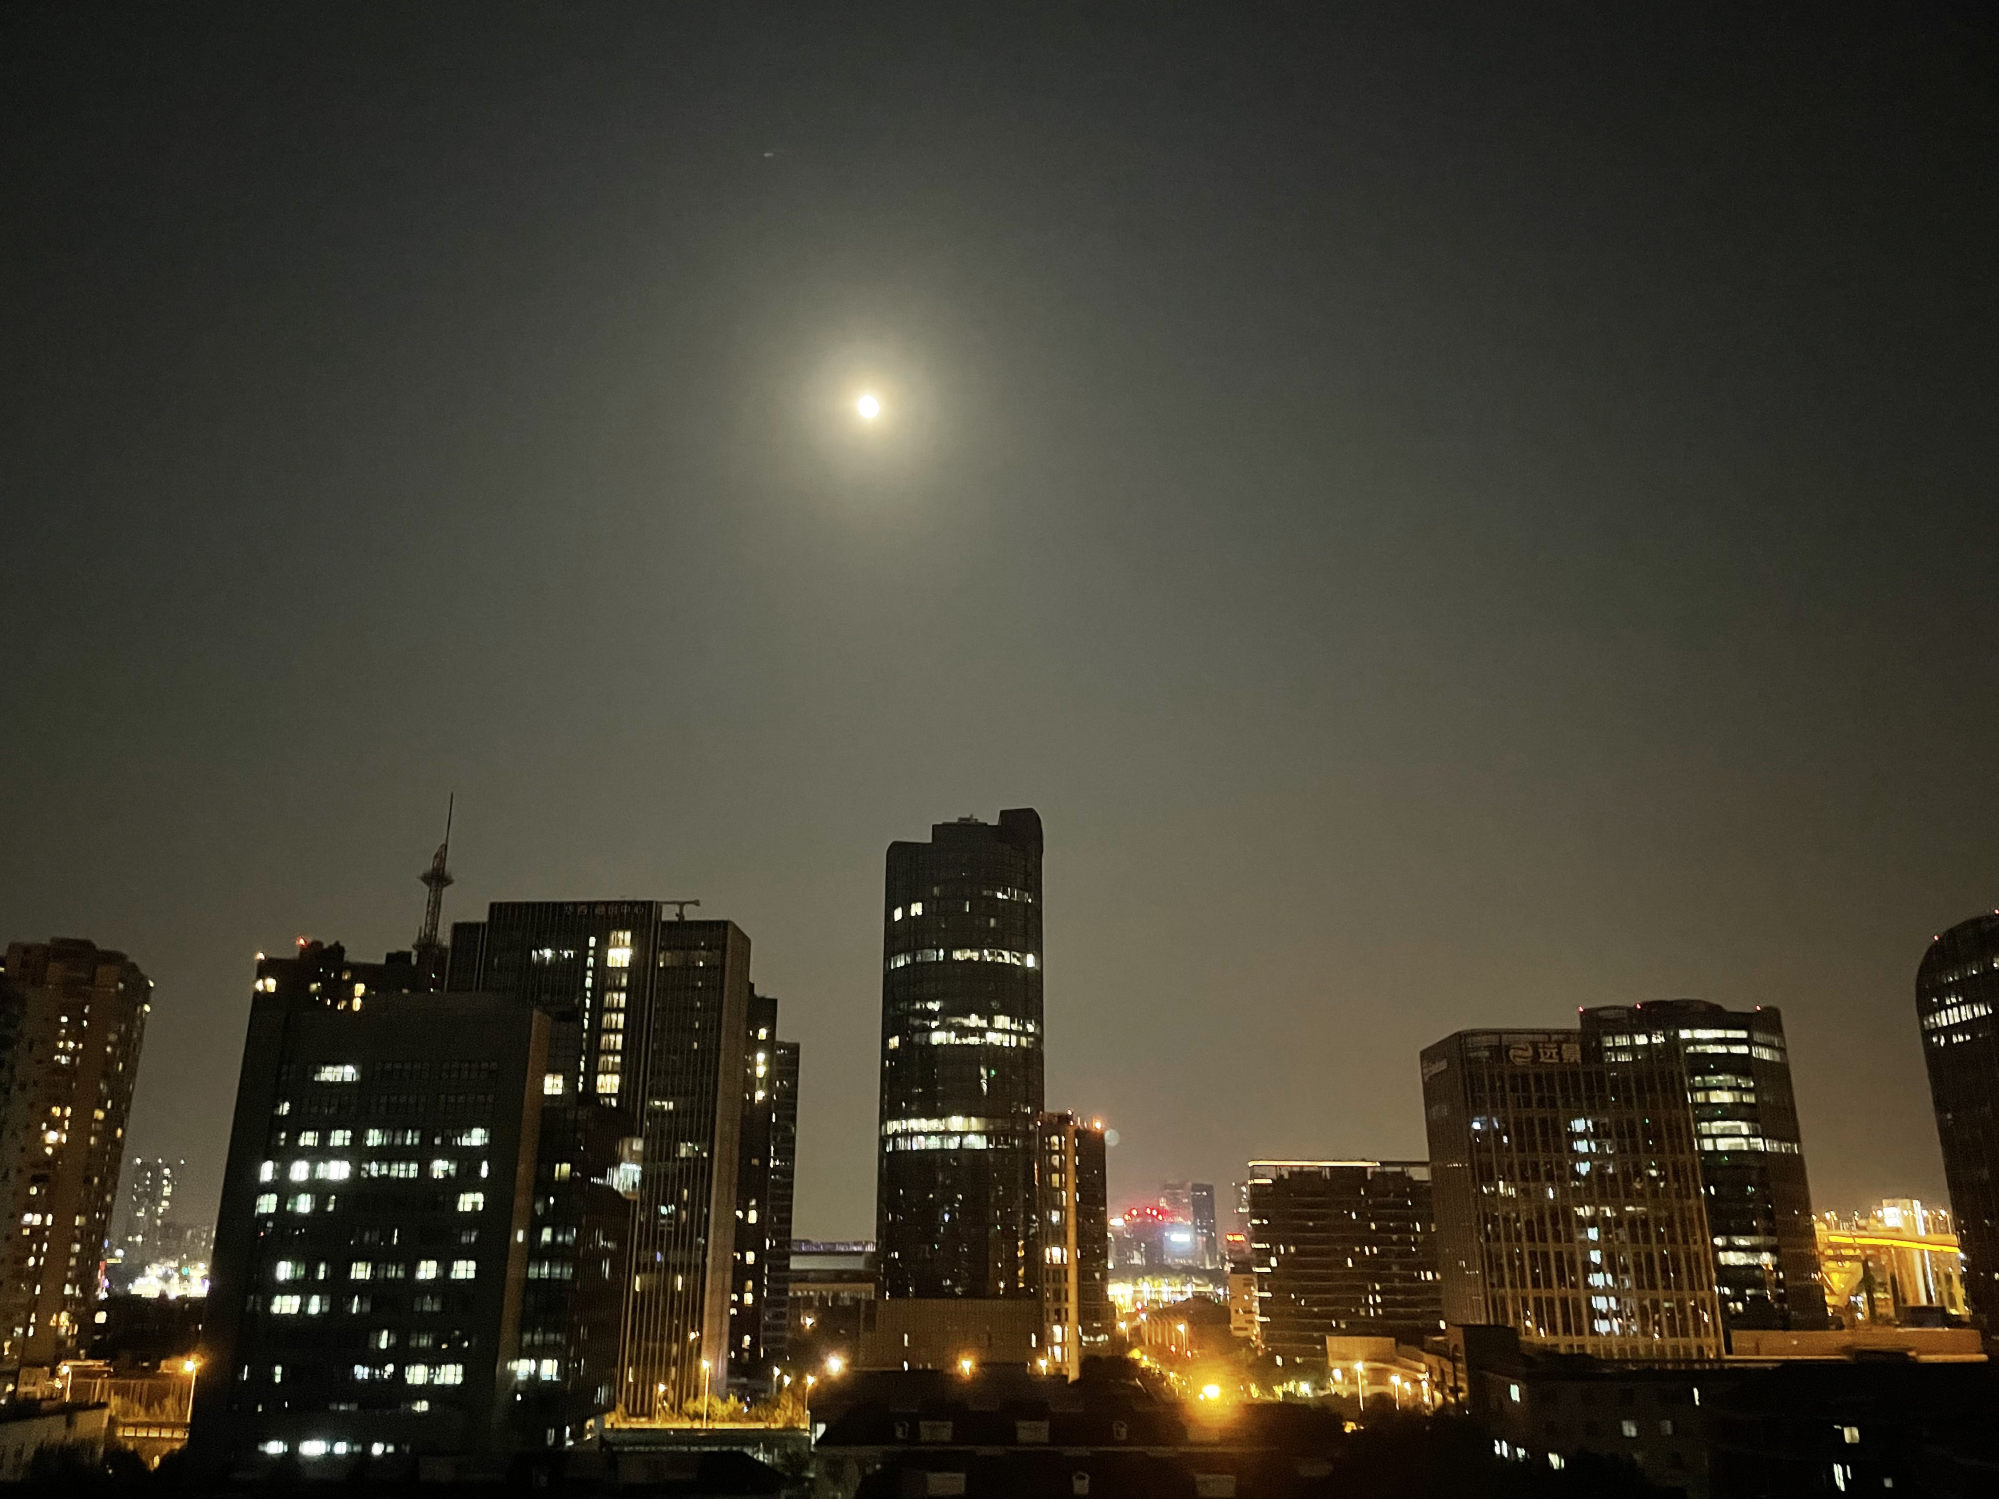 The post reporter’s photo of Monday’s ‘super moon’ was shared on WeChat. Photo: SCMP/ Tracy Qu